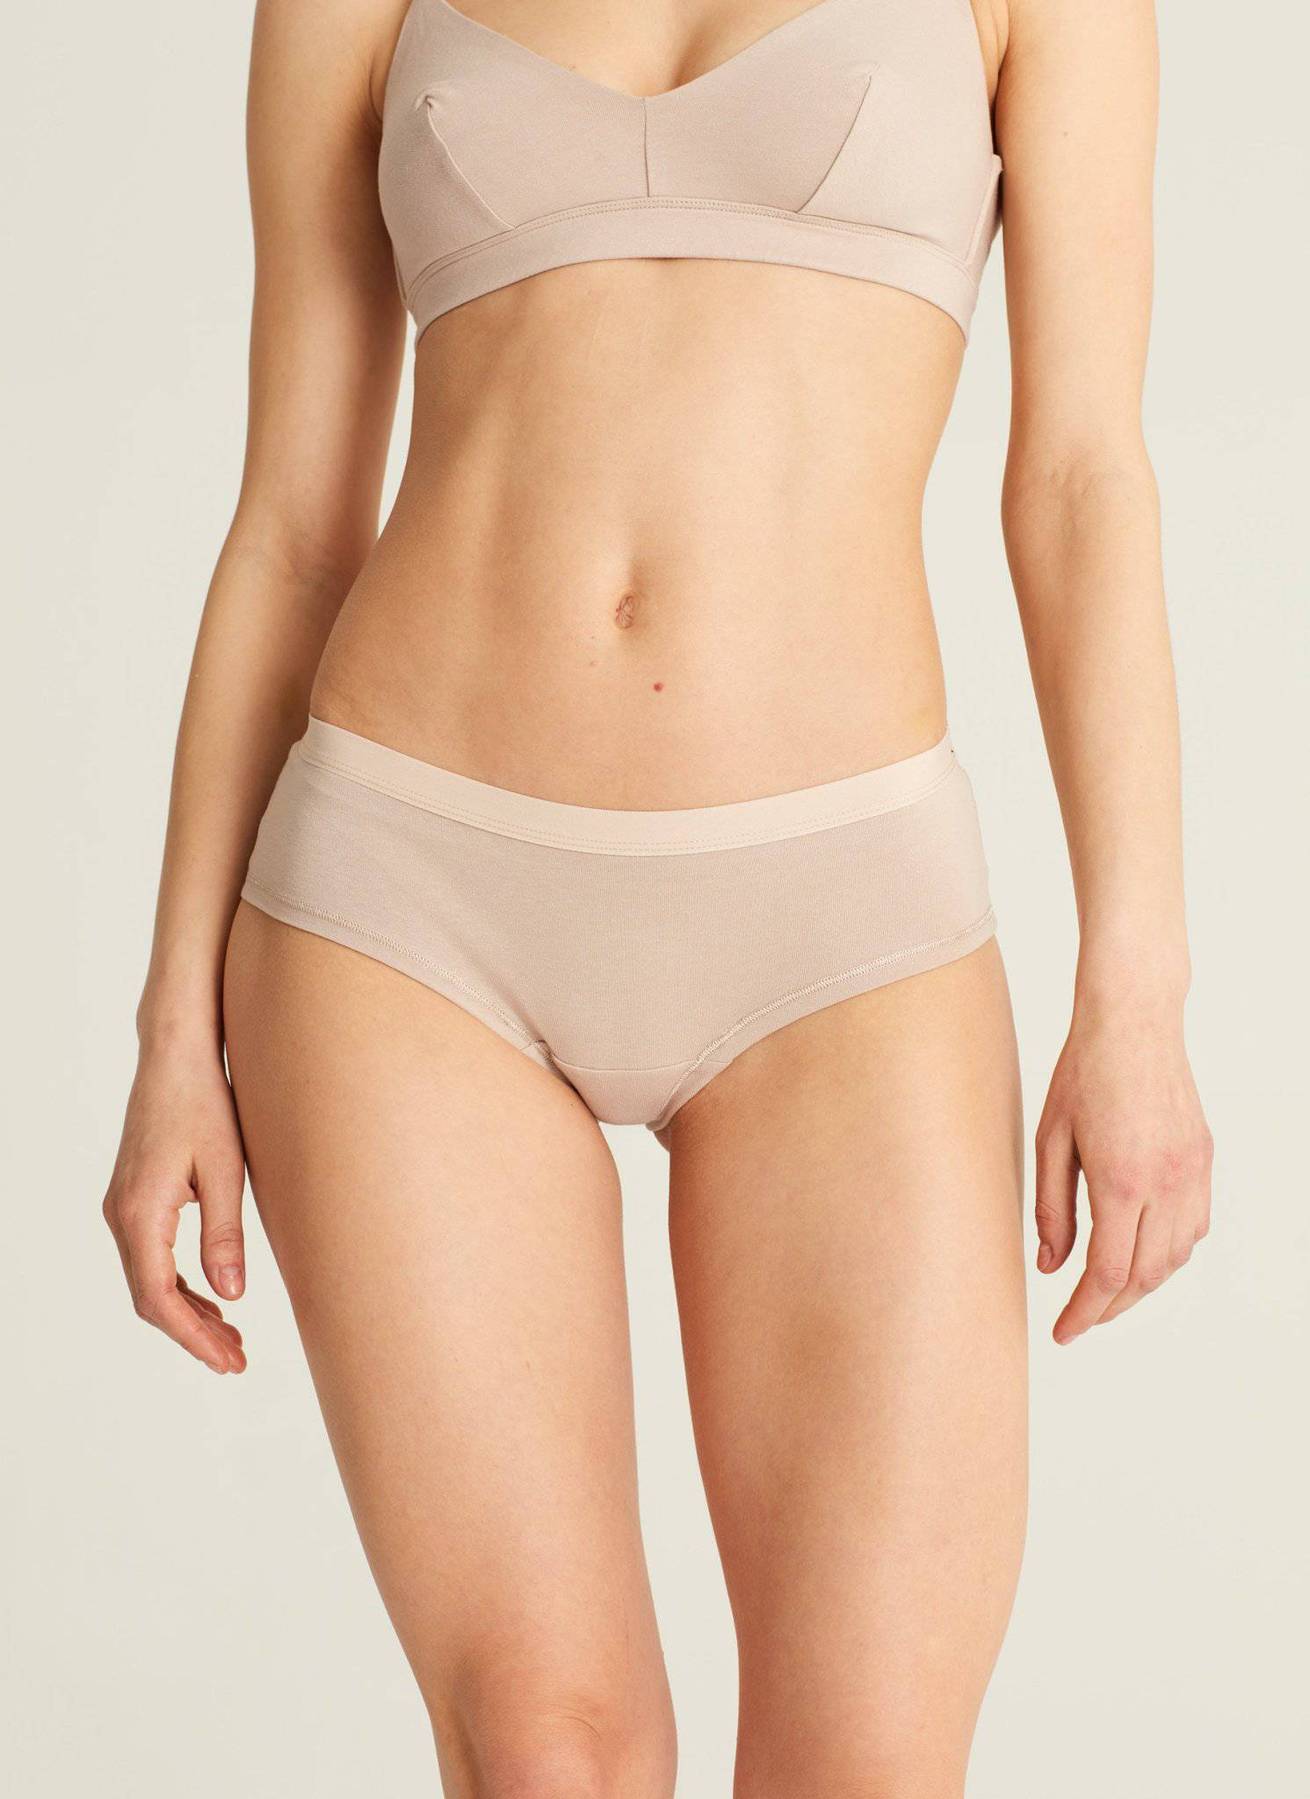 White Organic Cotton High Waisted Knickers, Ethical & Sustainable Lingerie